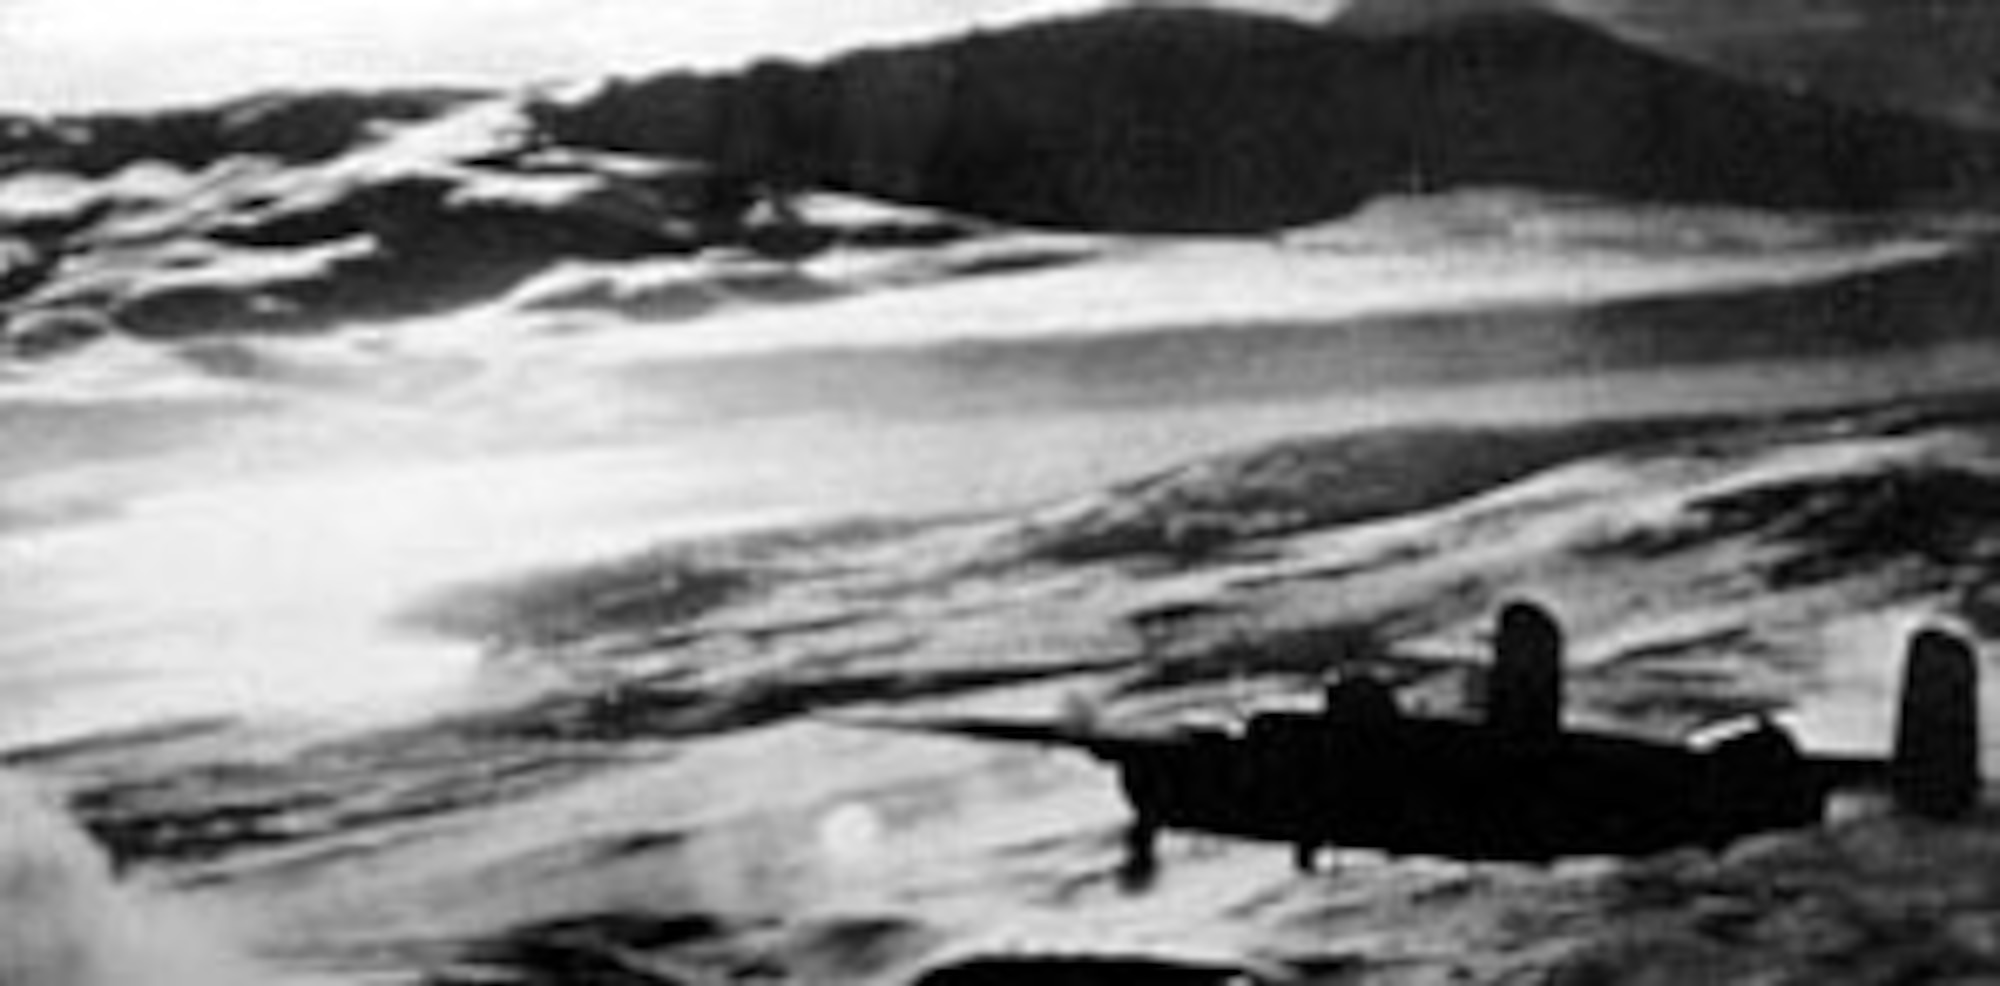 An 11th Air Force B-25 based in the Aleutian Islands leads an attack on an enemy convoy near the Kurile Islands. This air strike left six Japanese vessels either sunk or damaged. (U.S. Air Force photo)